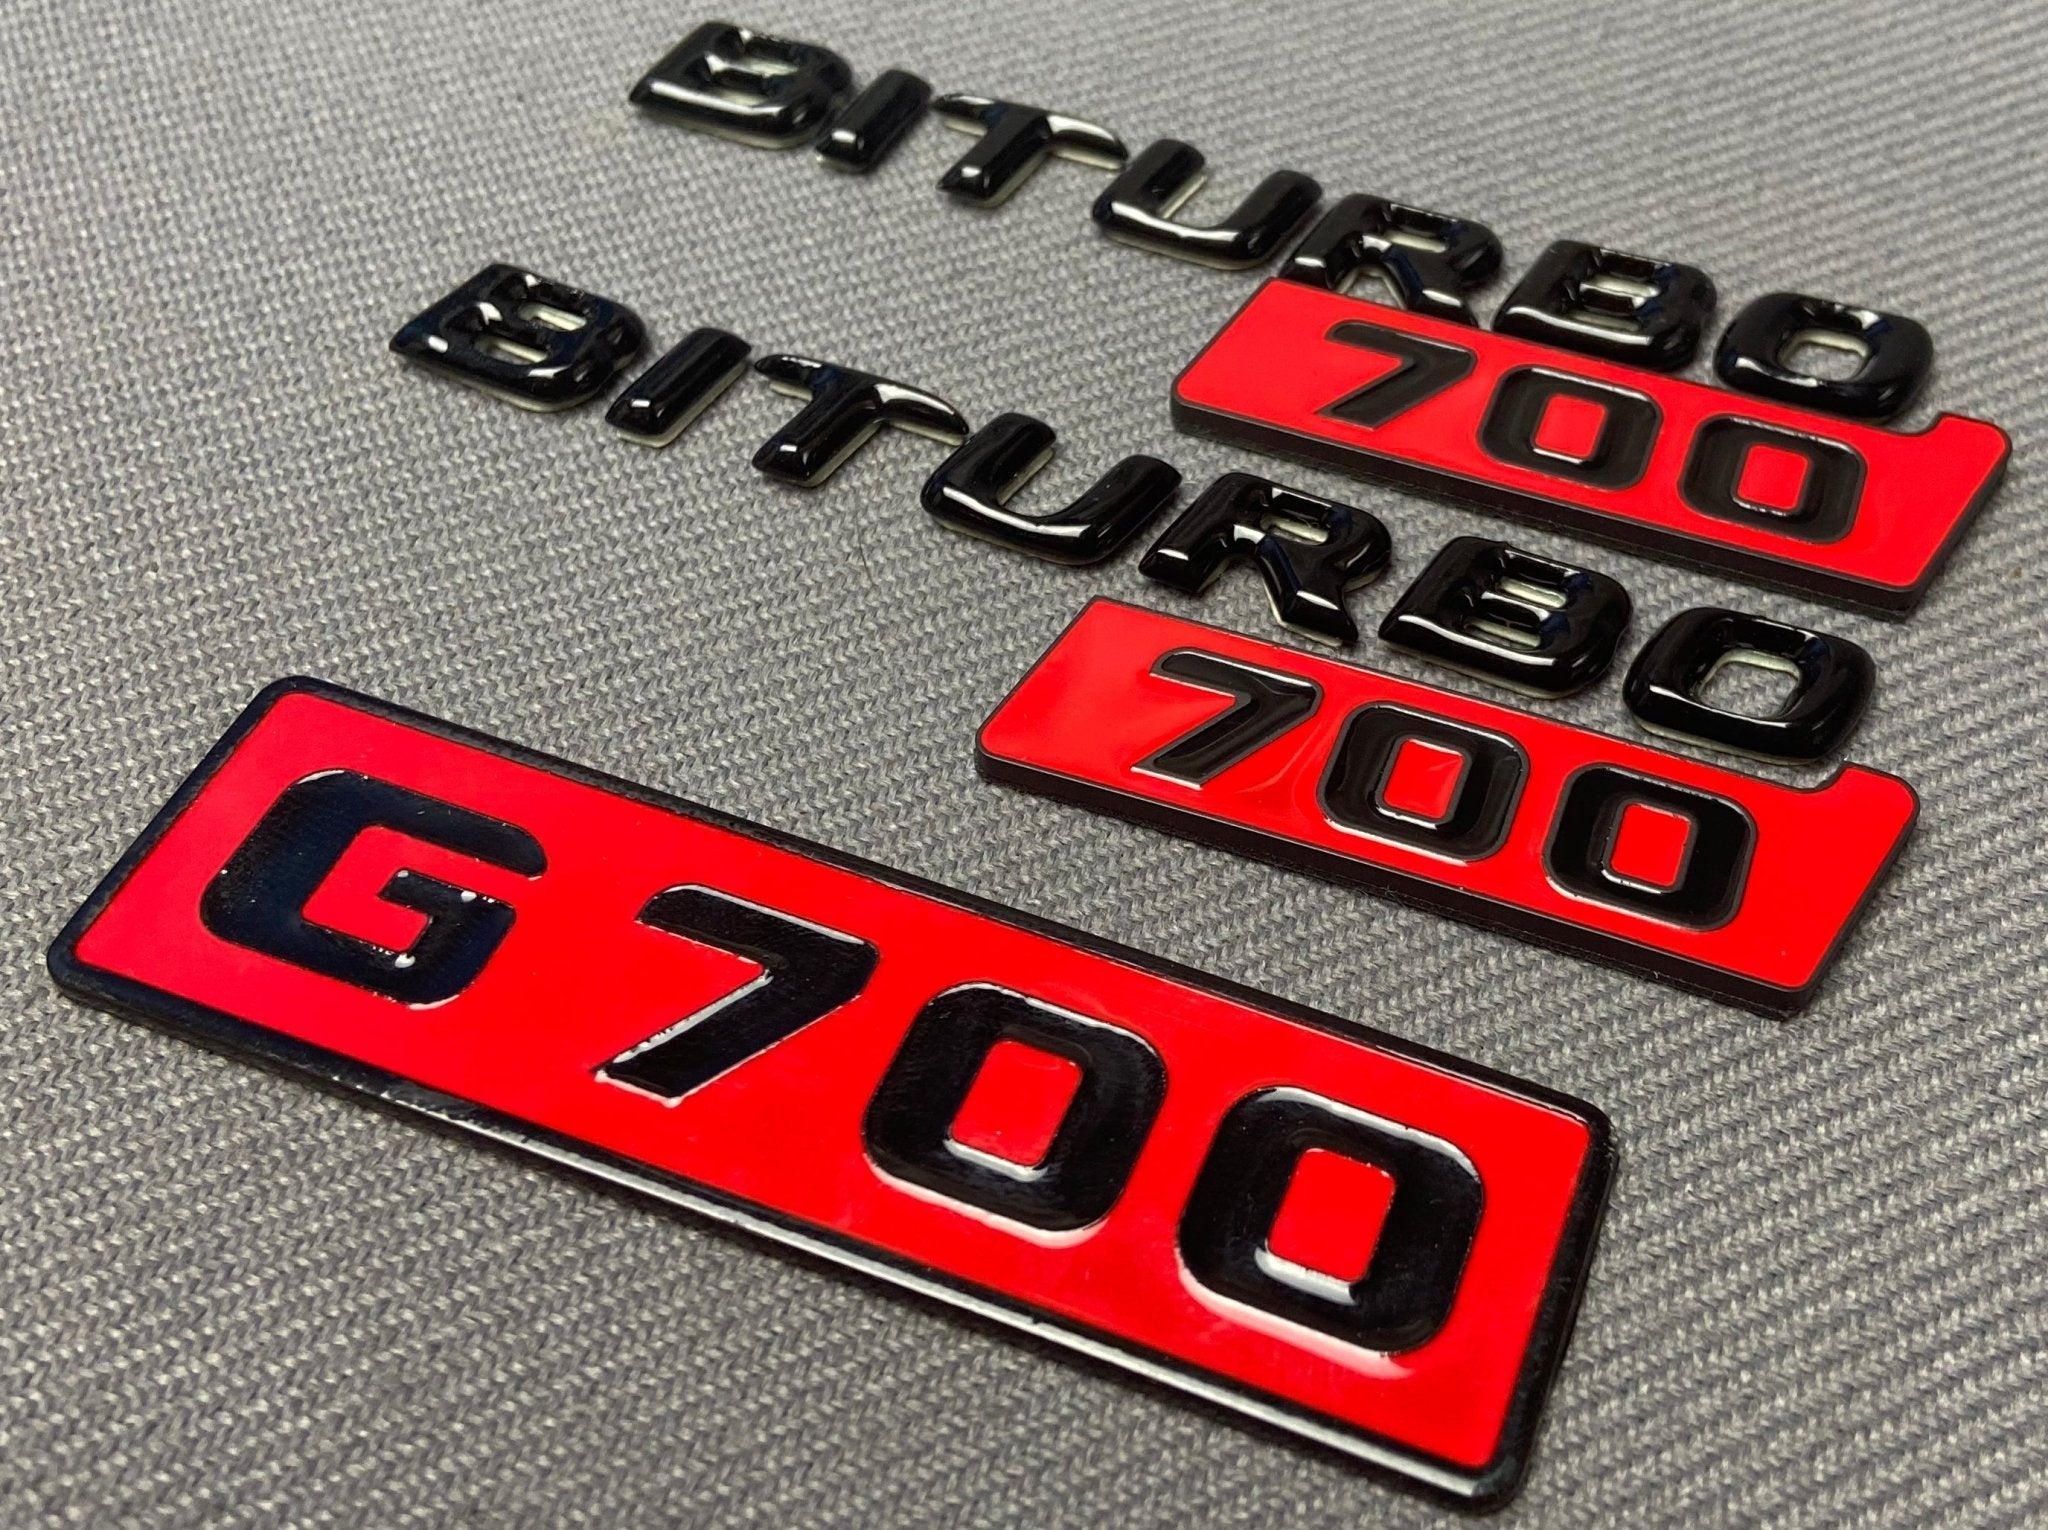 Brabus style set of Badges 700 G700 biturbo Compatible with Mercedes-Benz W463 W463A G-Wagon G-Class